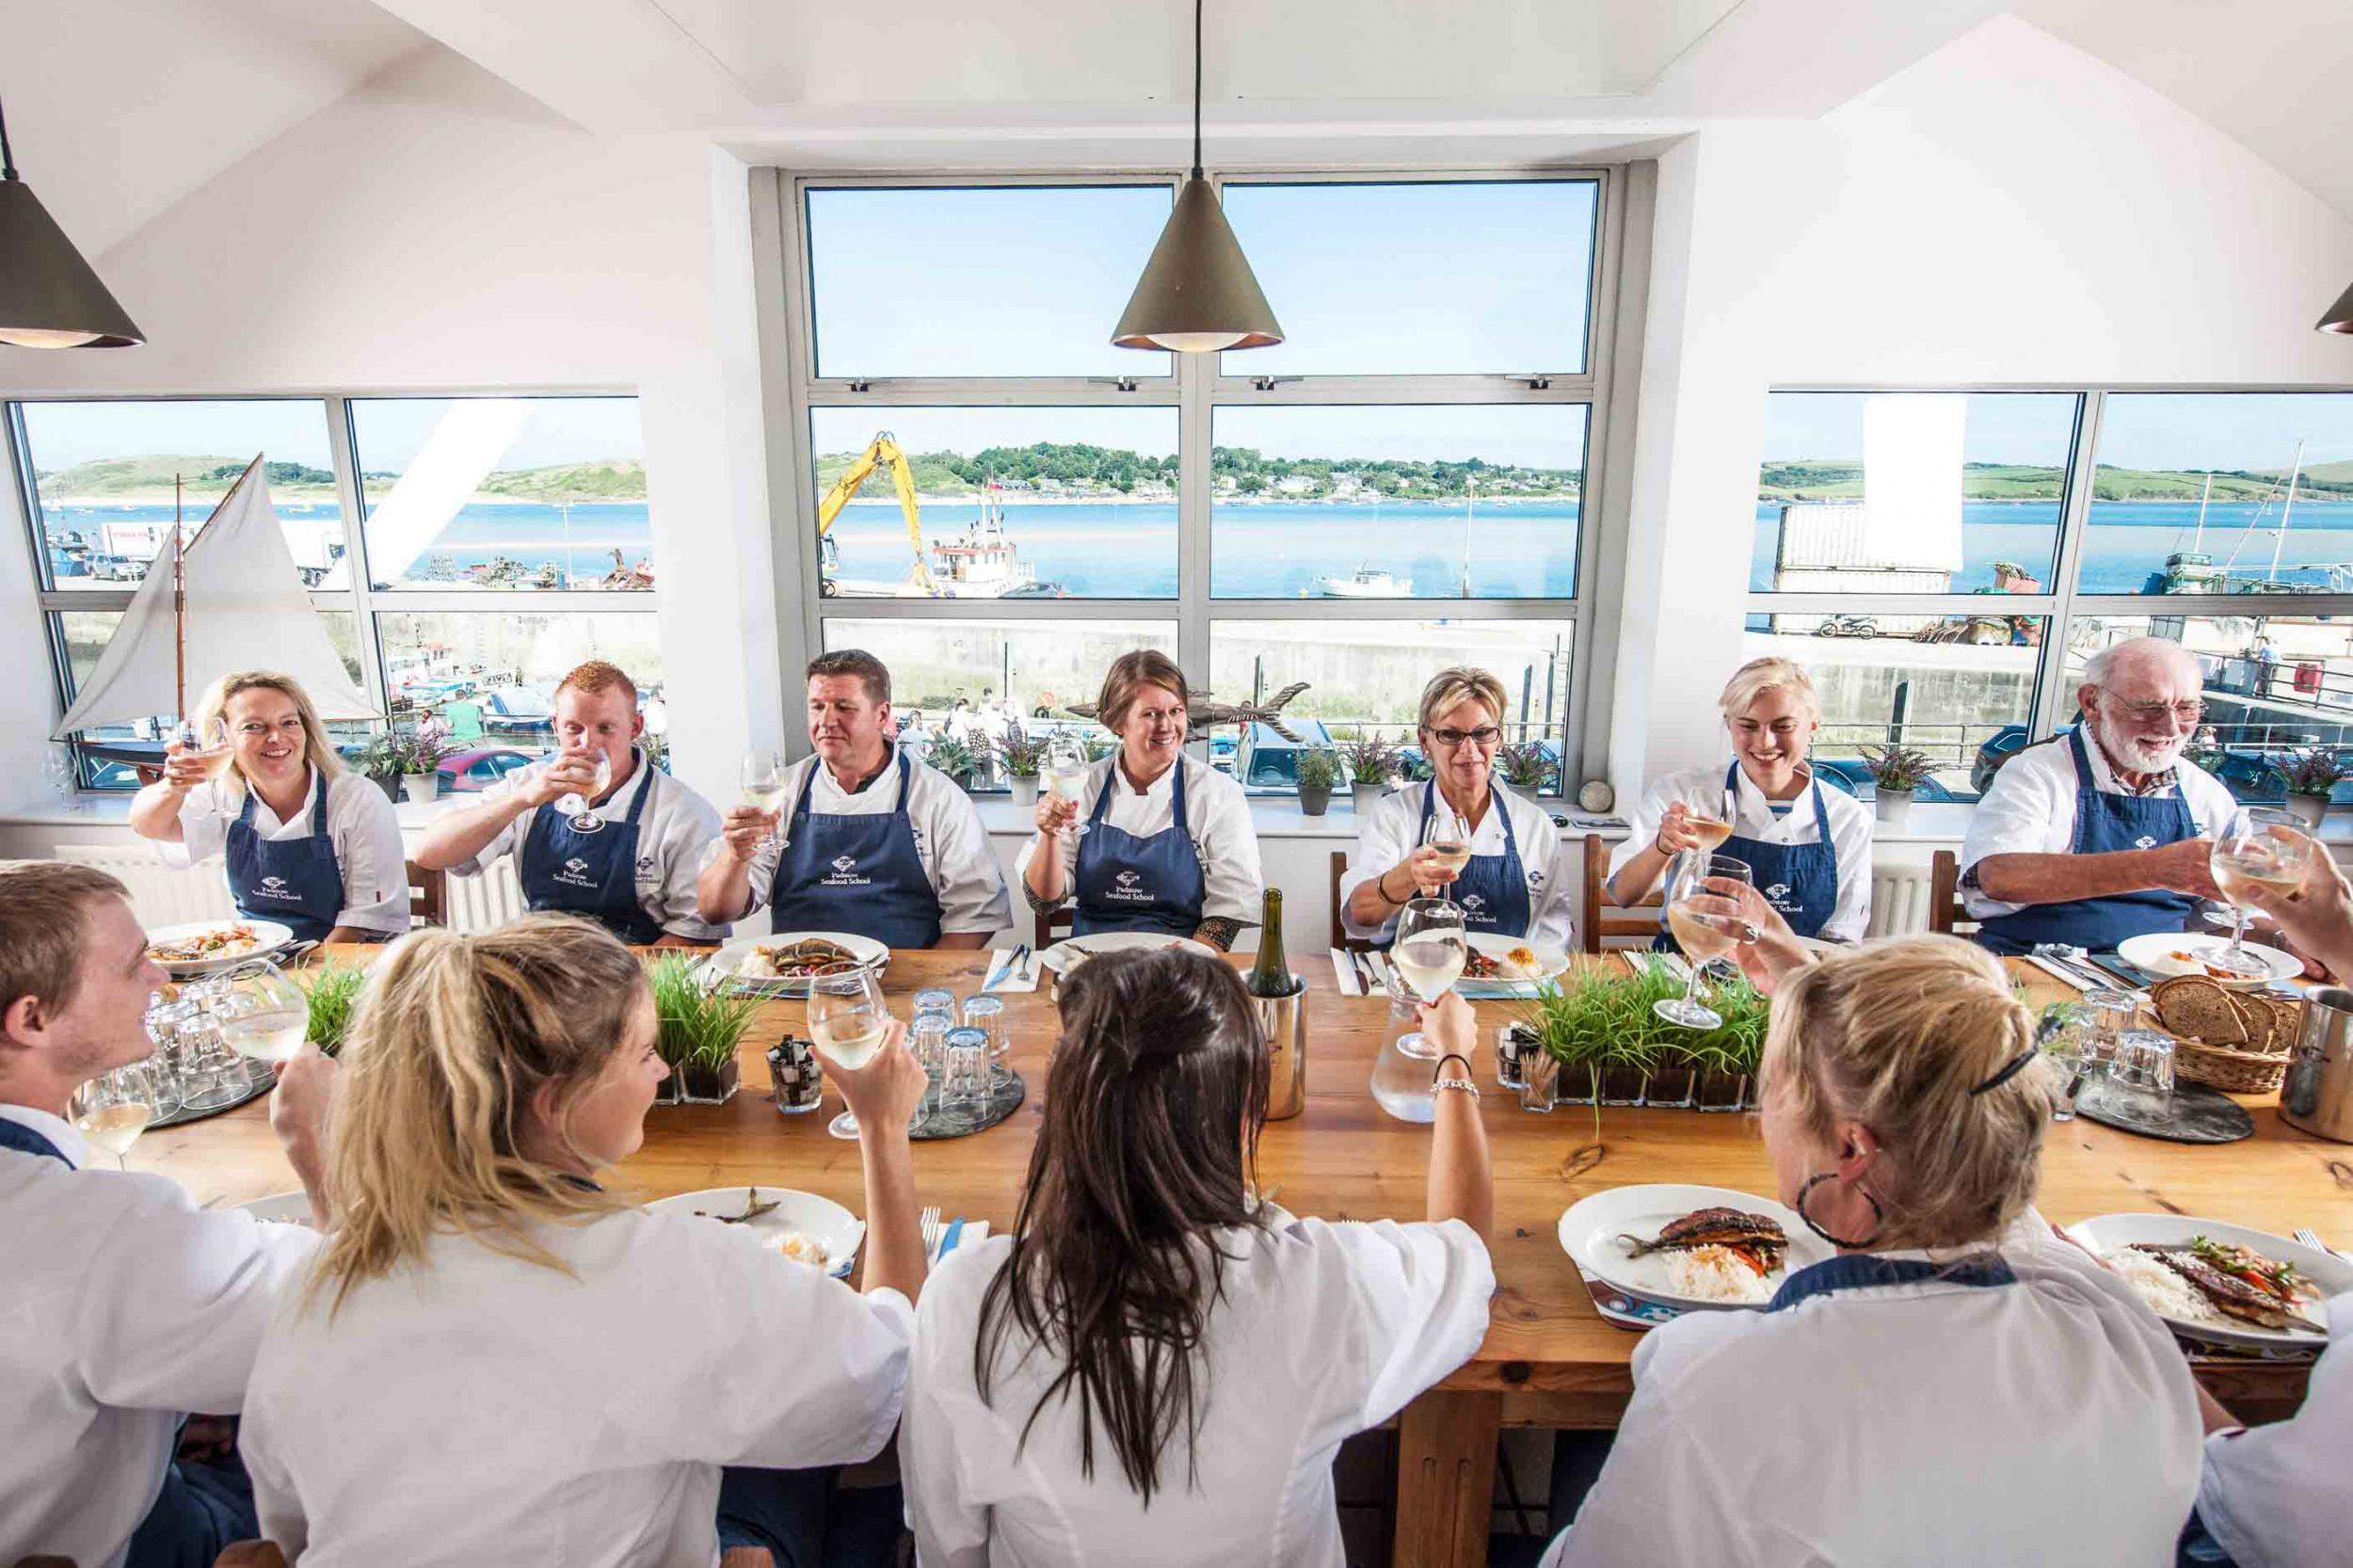 Raise a glass at Rick Stein's seafood school